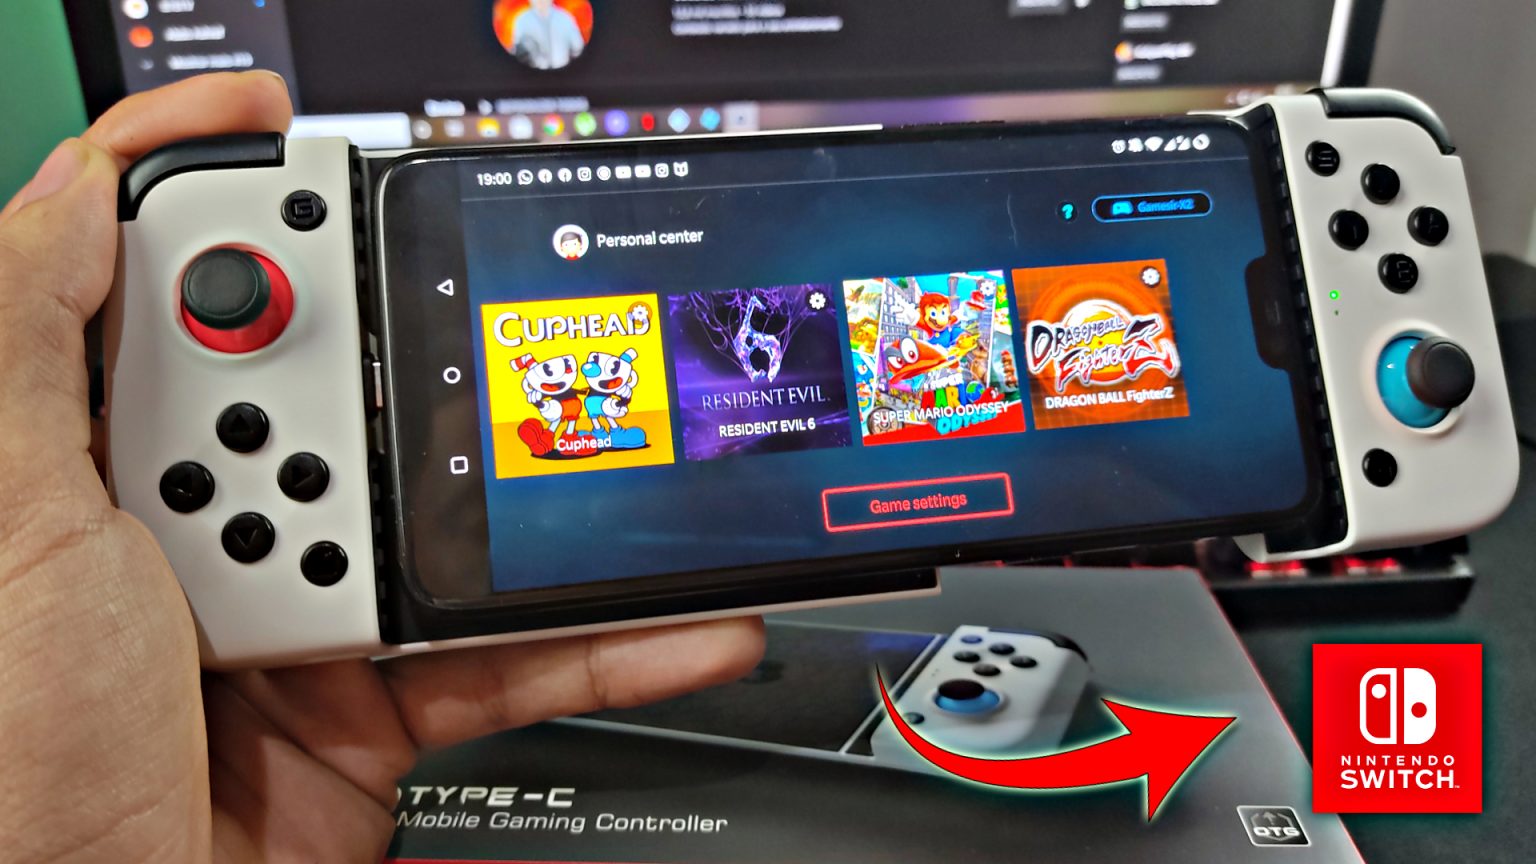 download nintendo switch emulator android